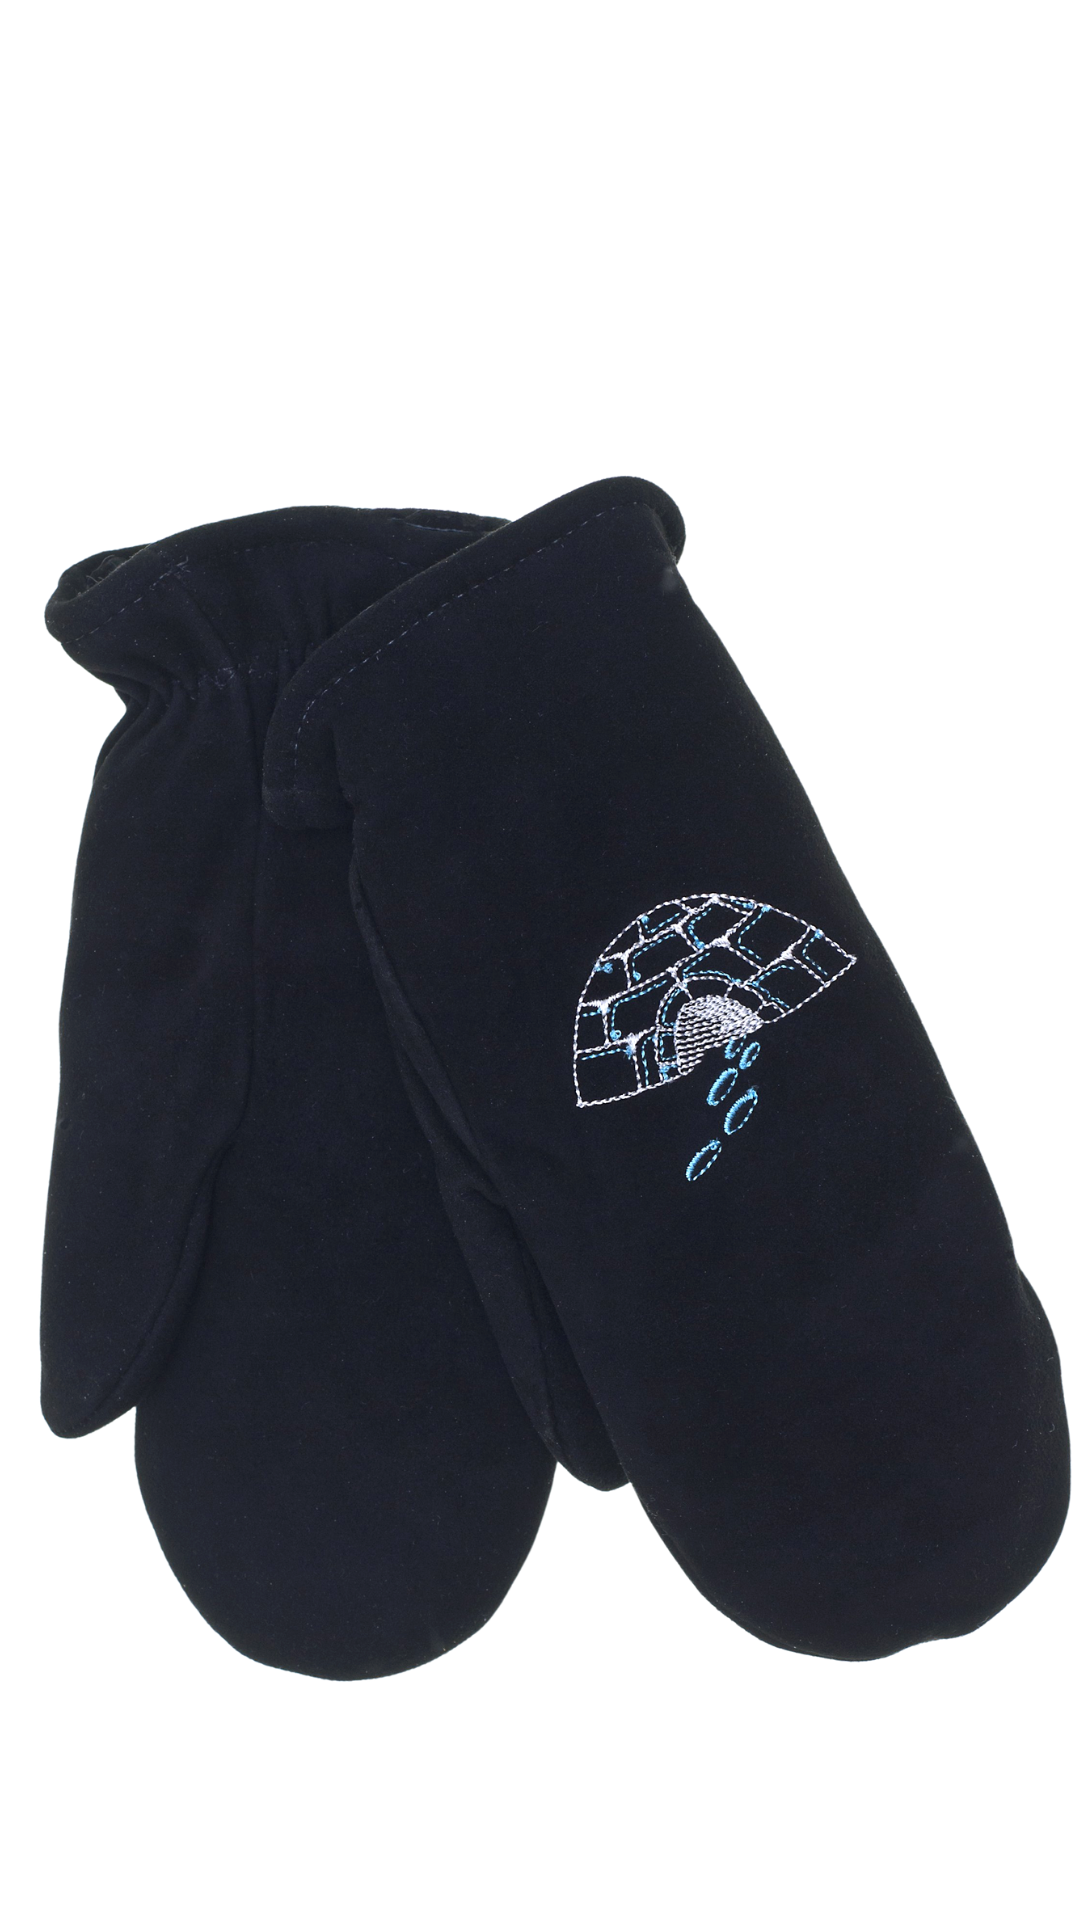 Embroidered Suede Igloo Mitt. Style RG2740LE